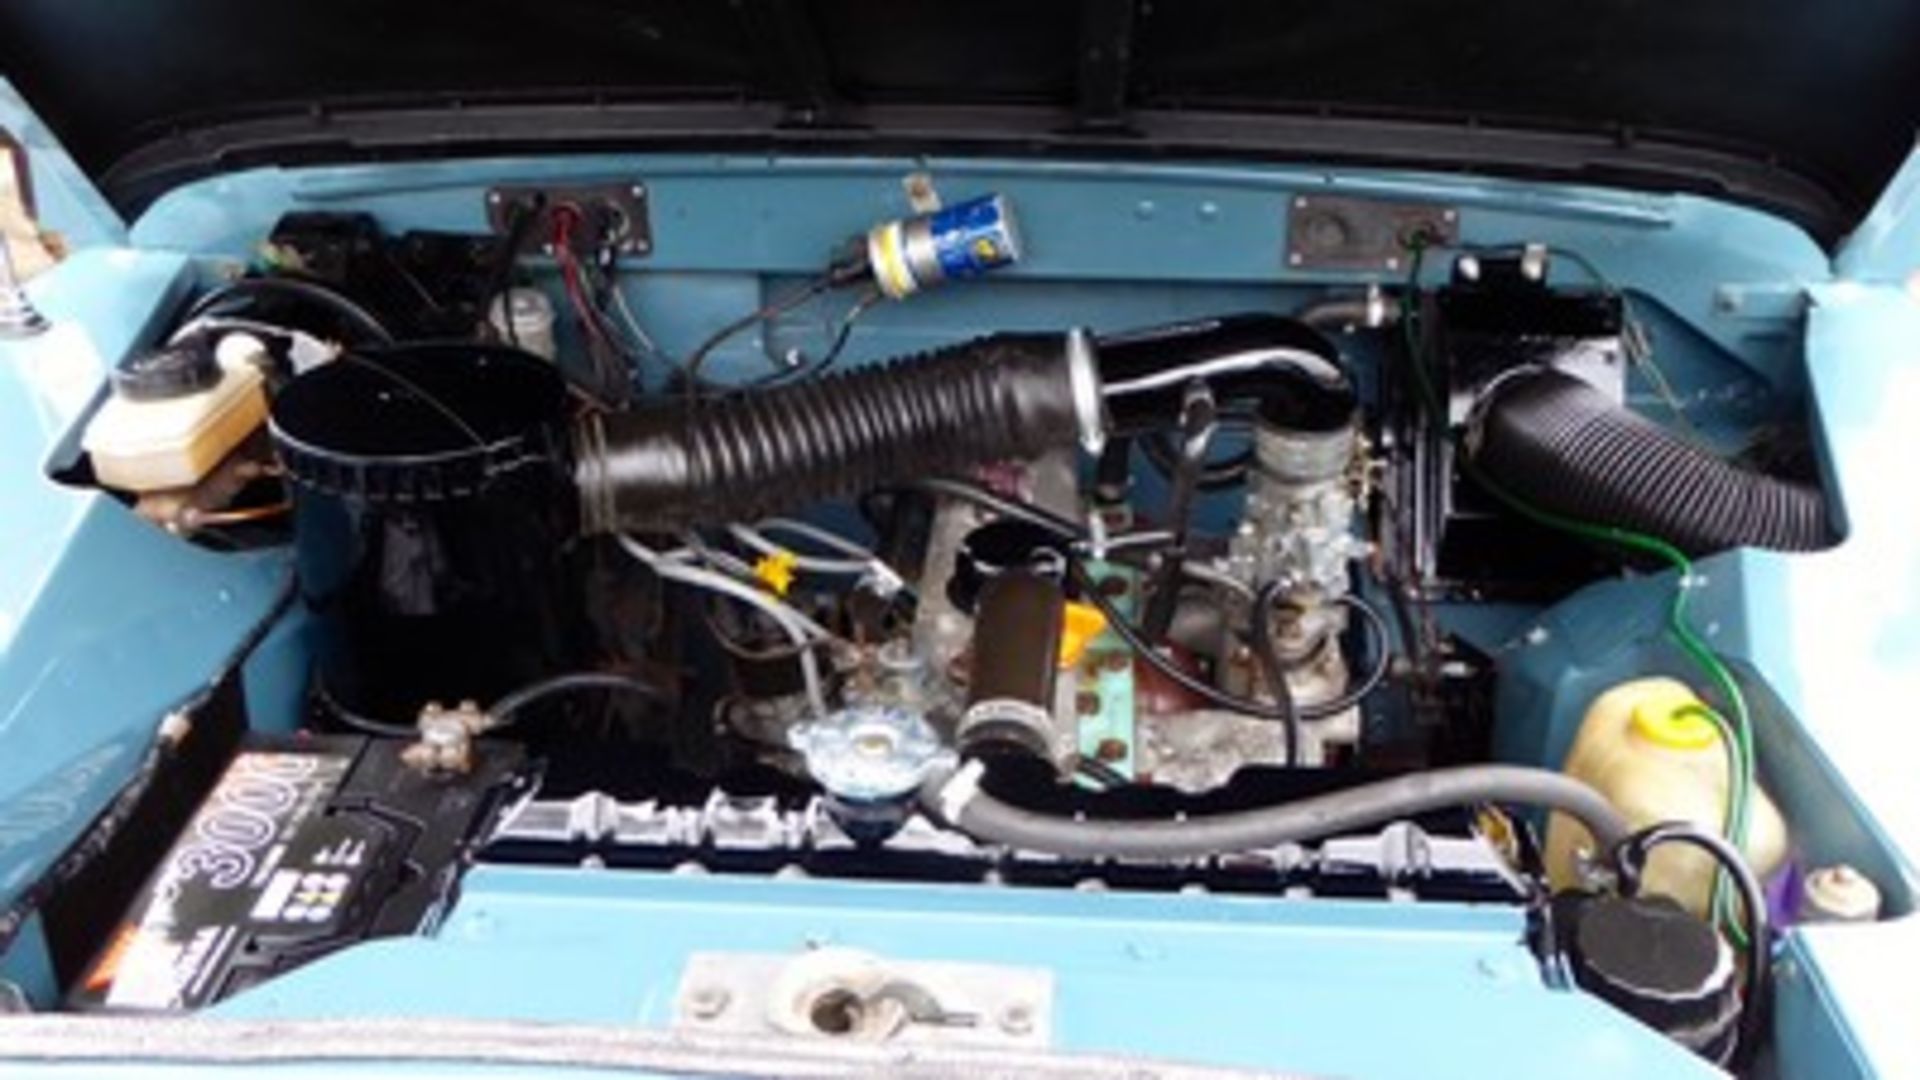 LAND ROVER 109" - 4 CYL - 2286cc - Image 27 of 36